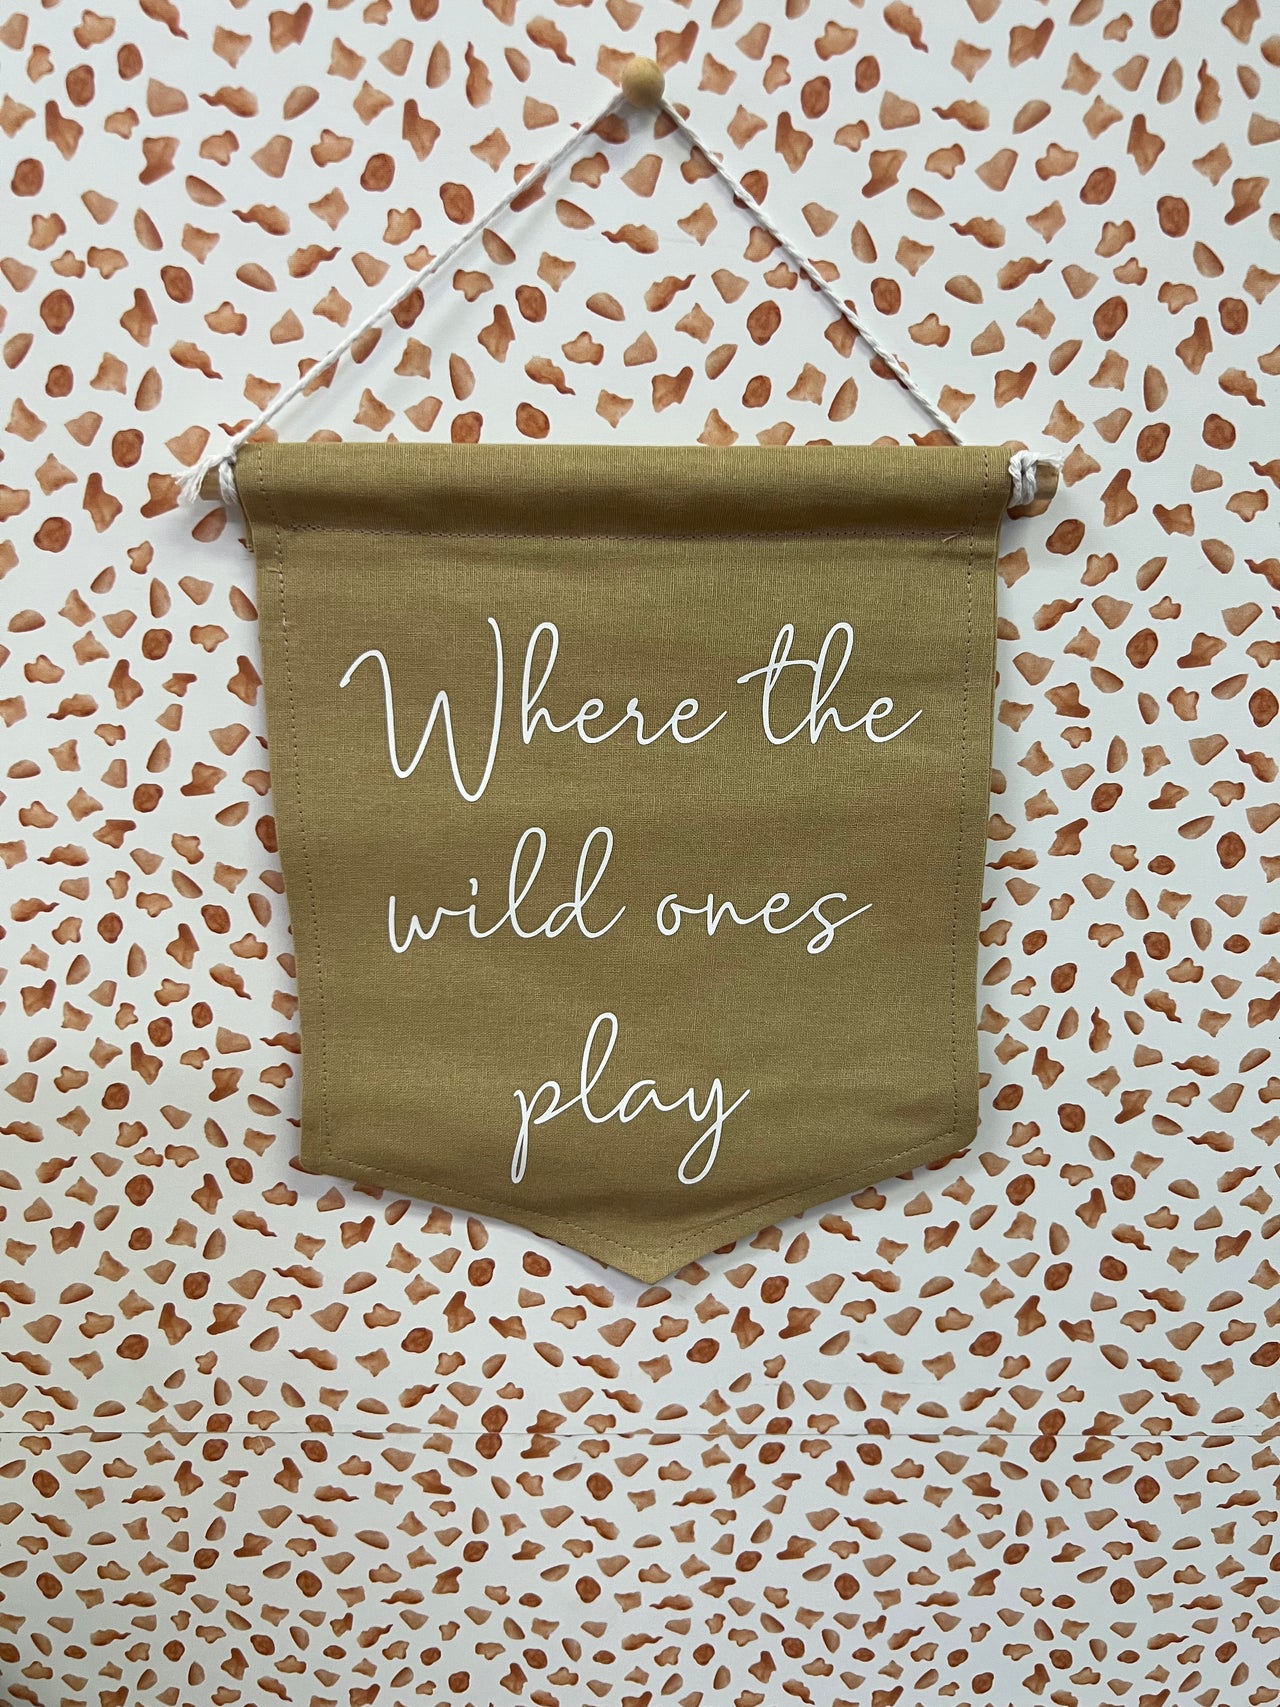 Where the wild ones play flag